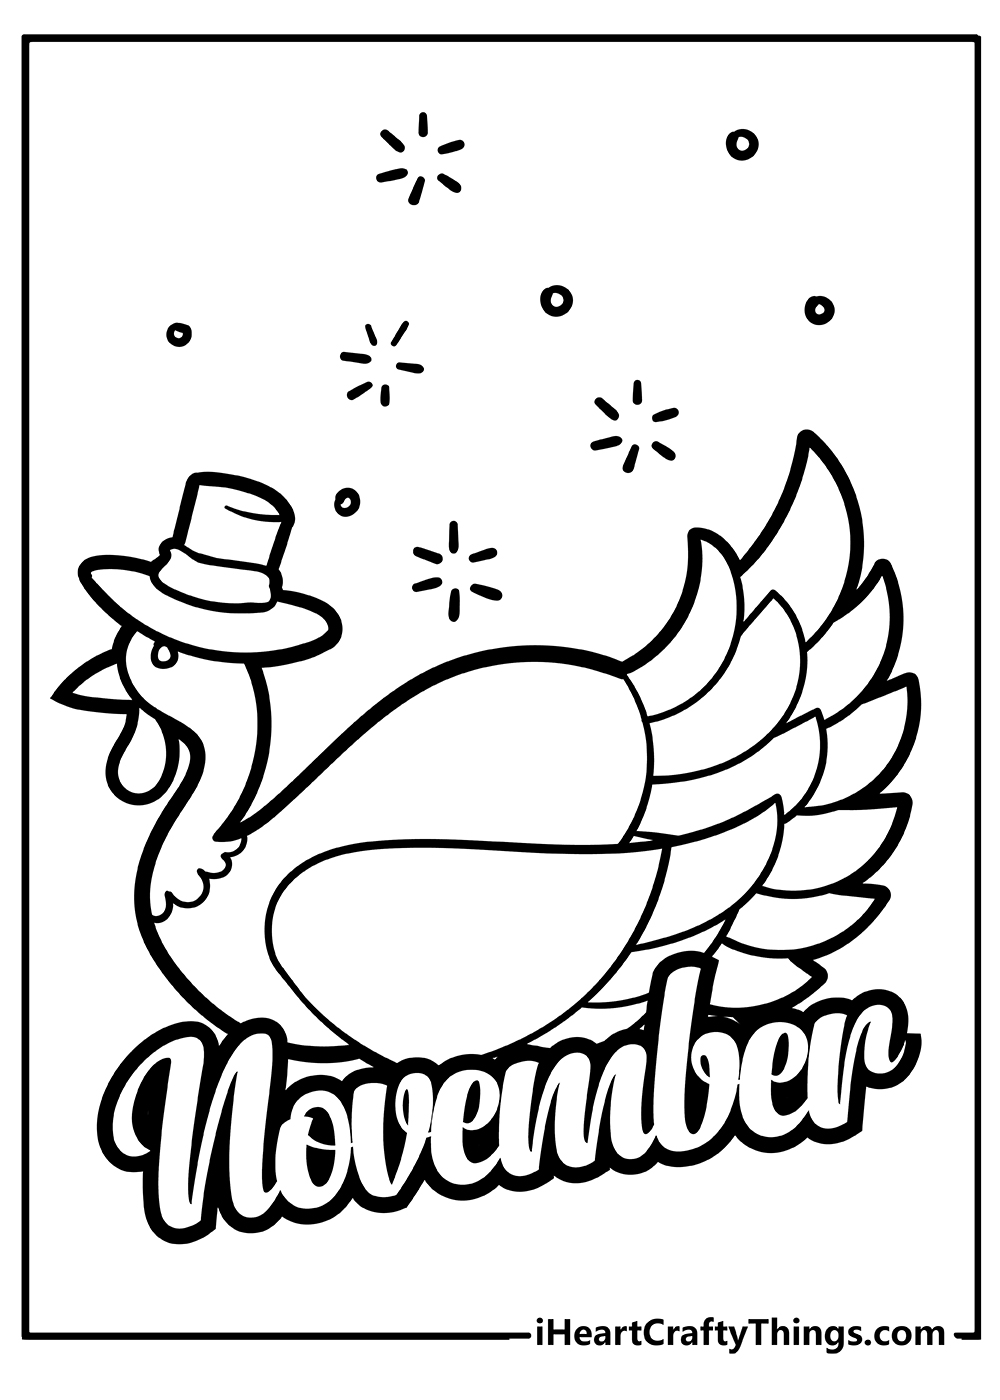 November coloring pages free printables